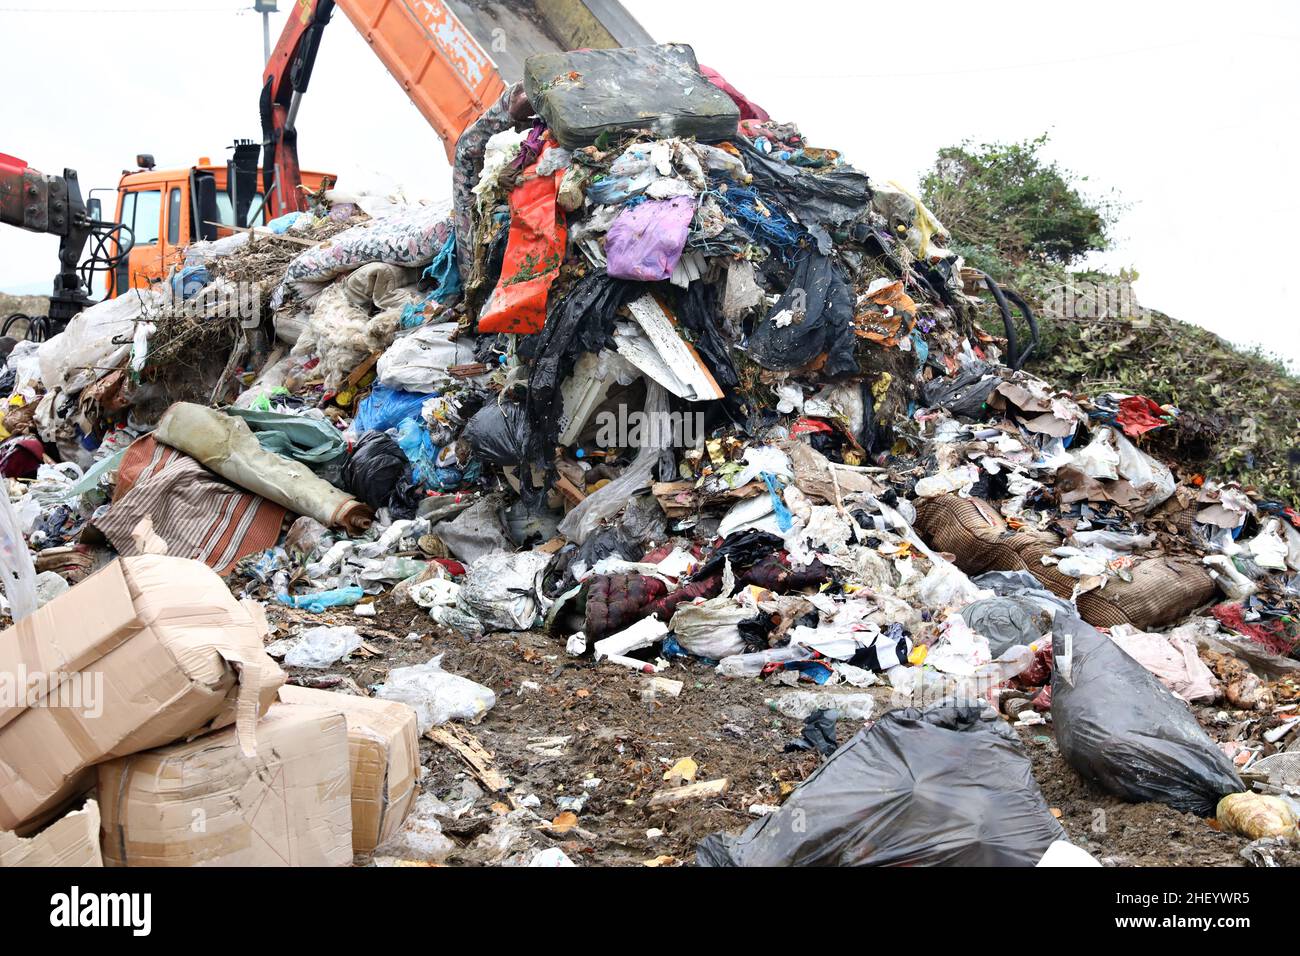 Garbage Trash Environment Dump Pollution Waste Recycling Rubbish